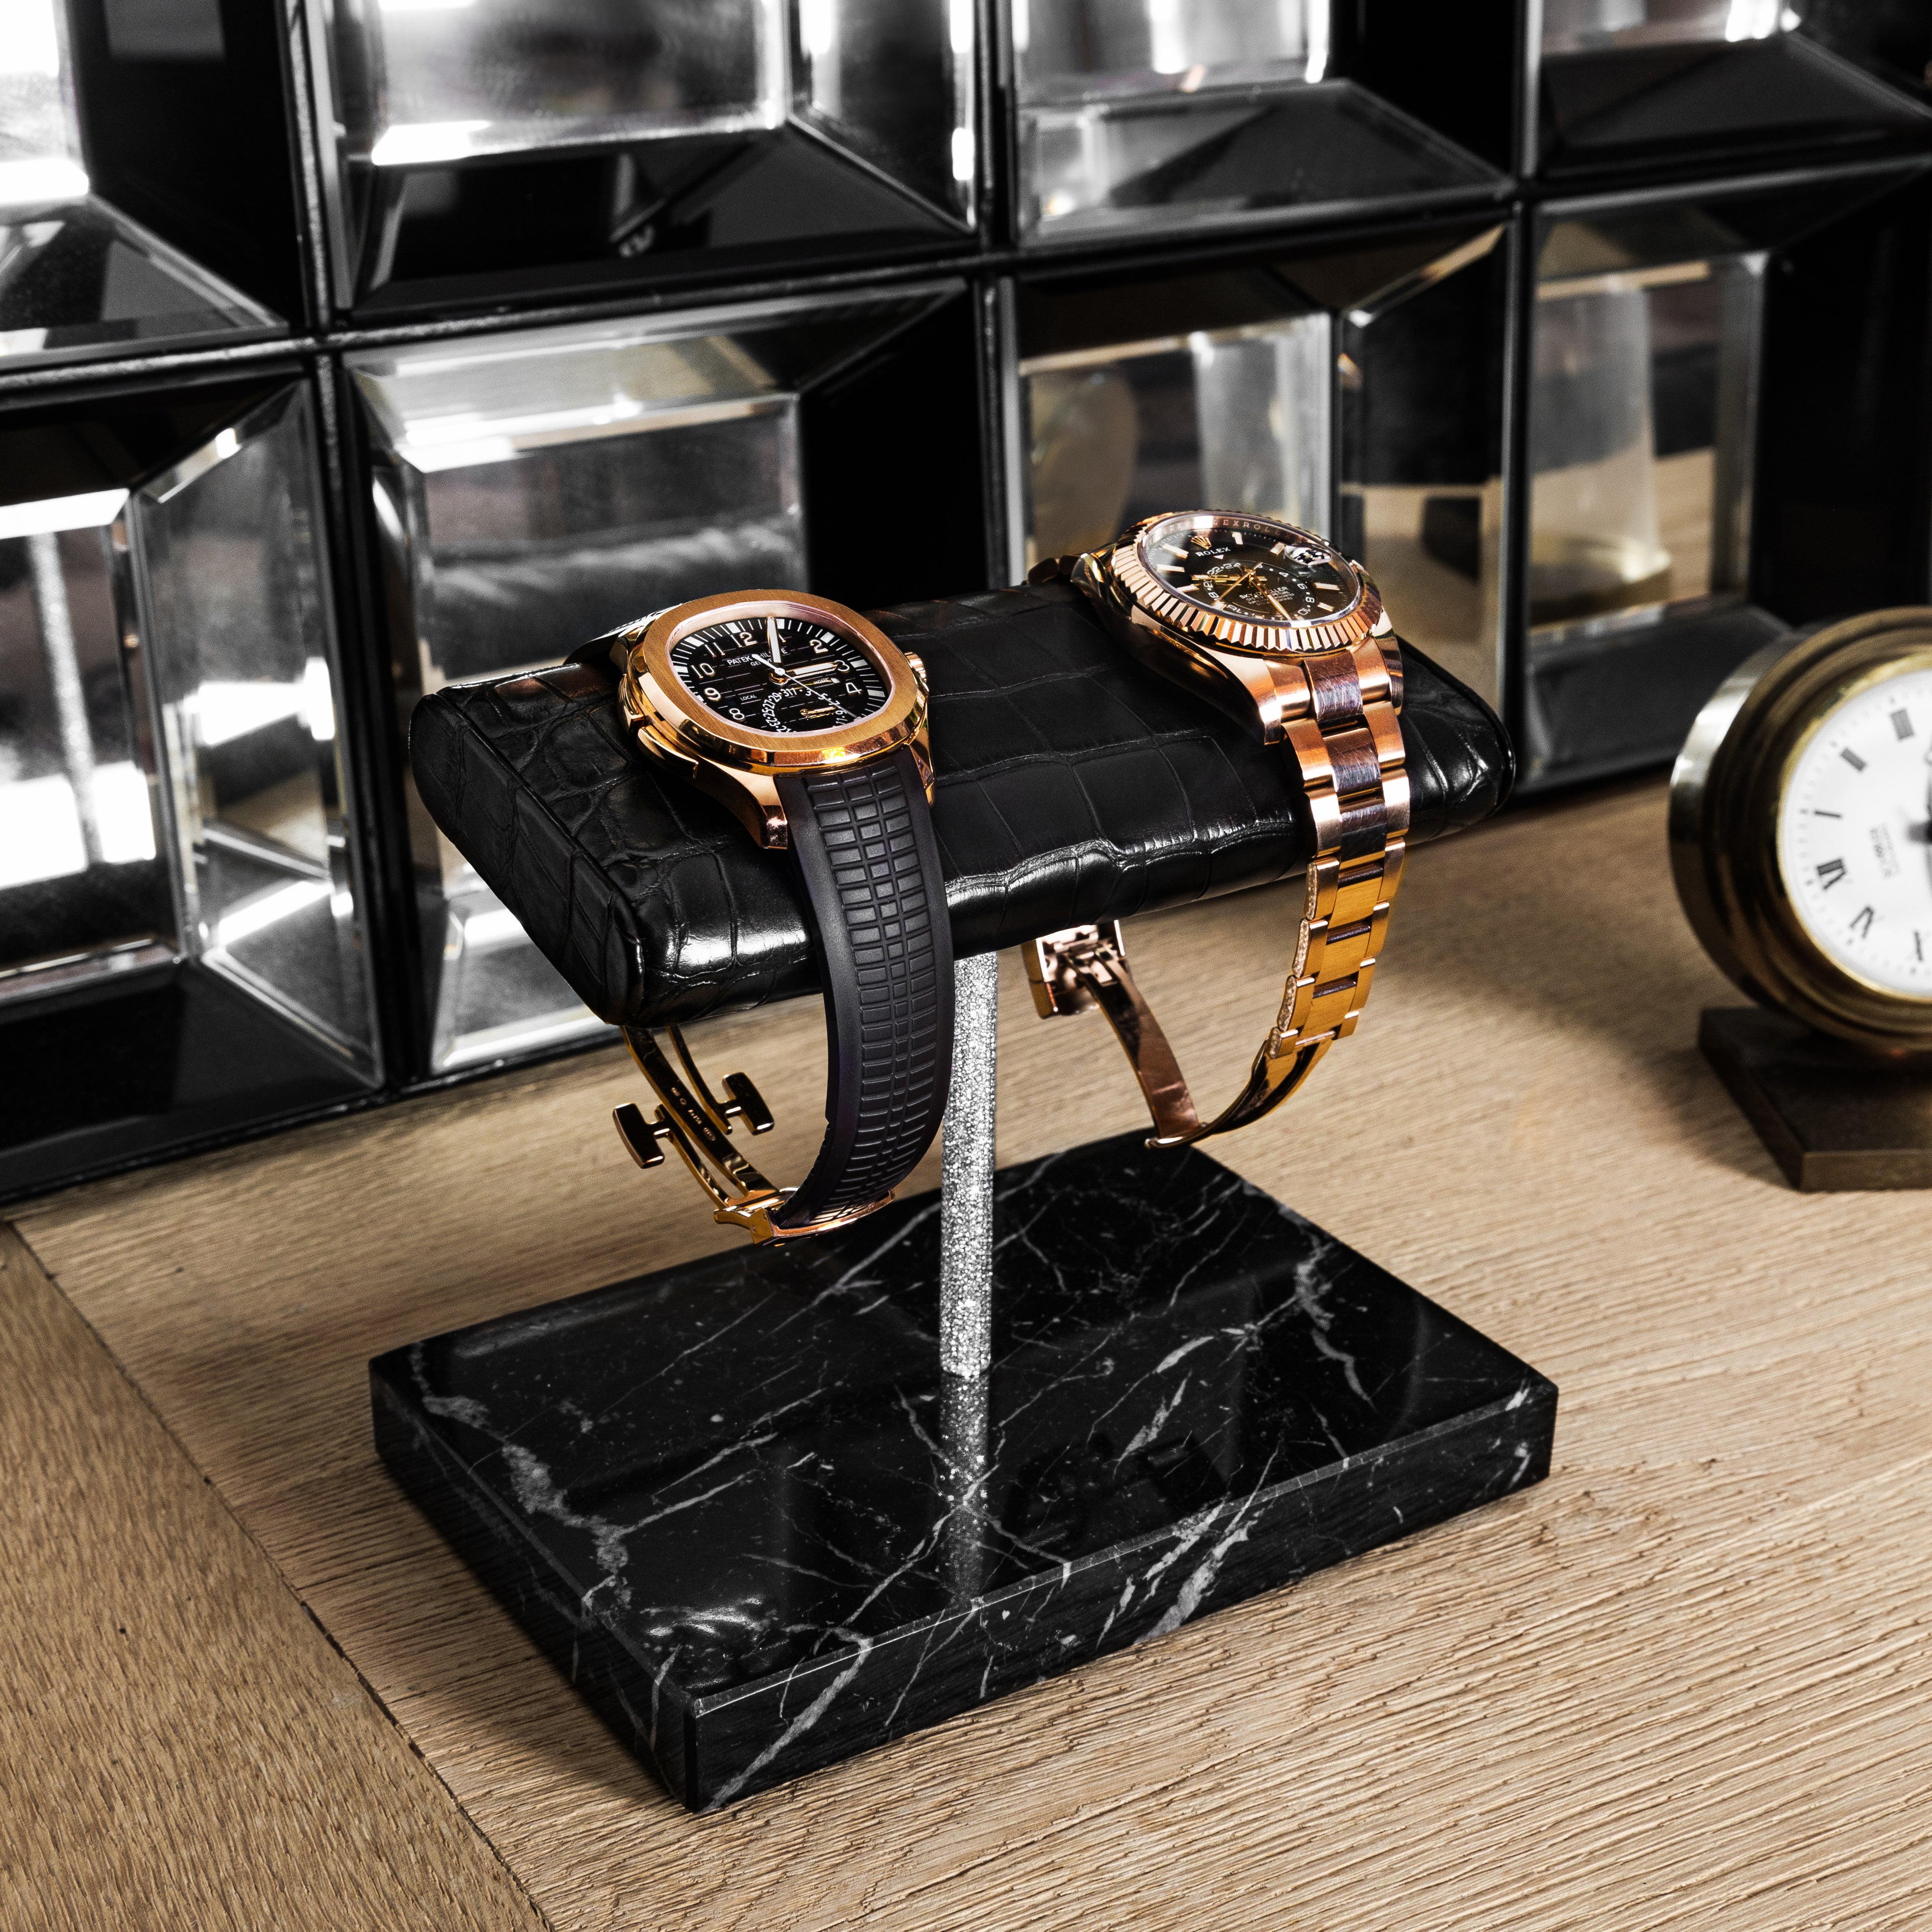 The Watch Stand x Cagau